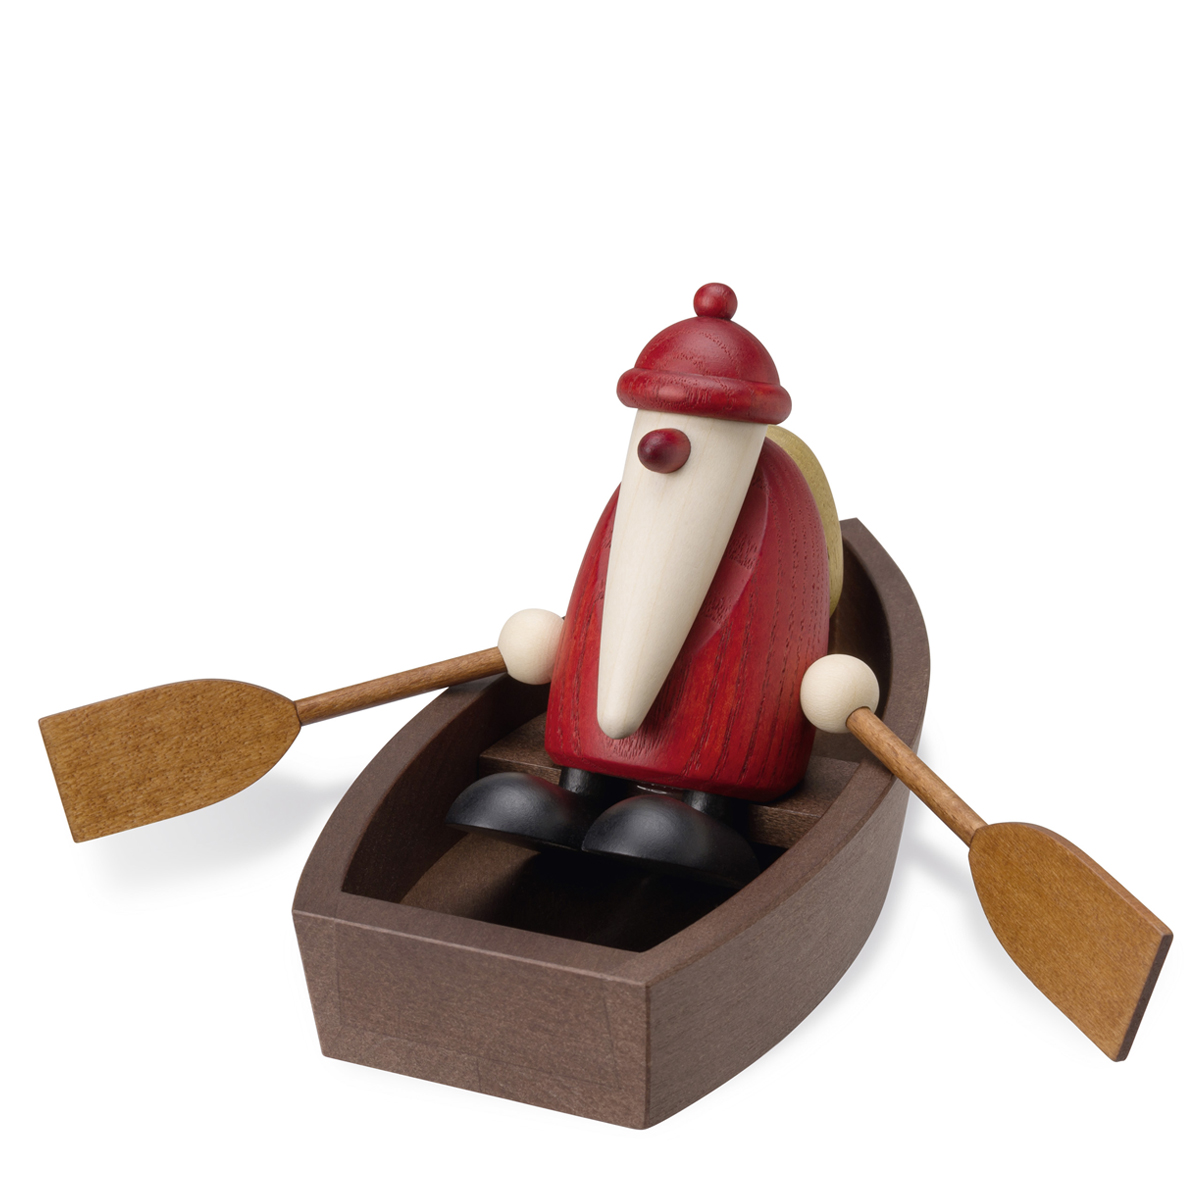 Santa Claus in a rowing boat, small